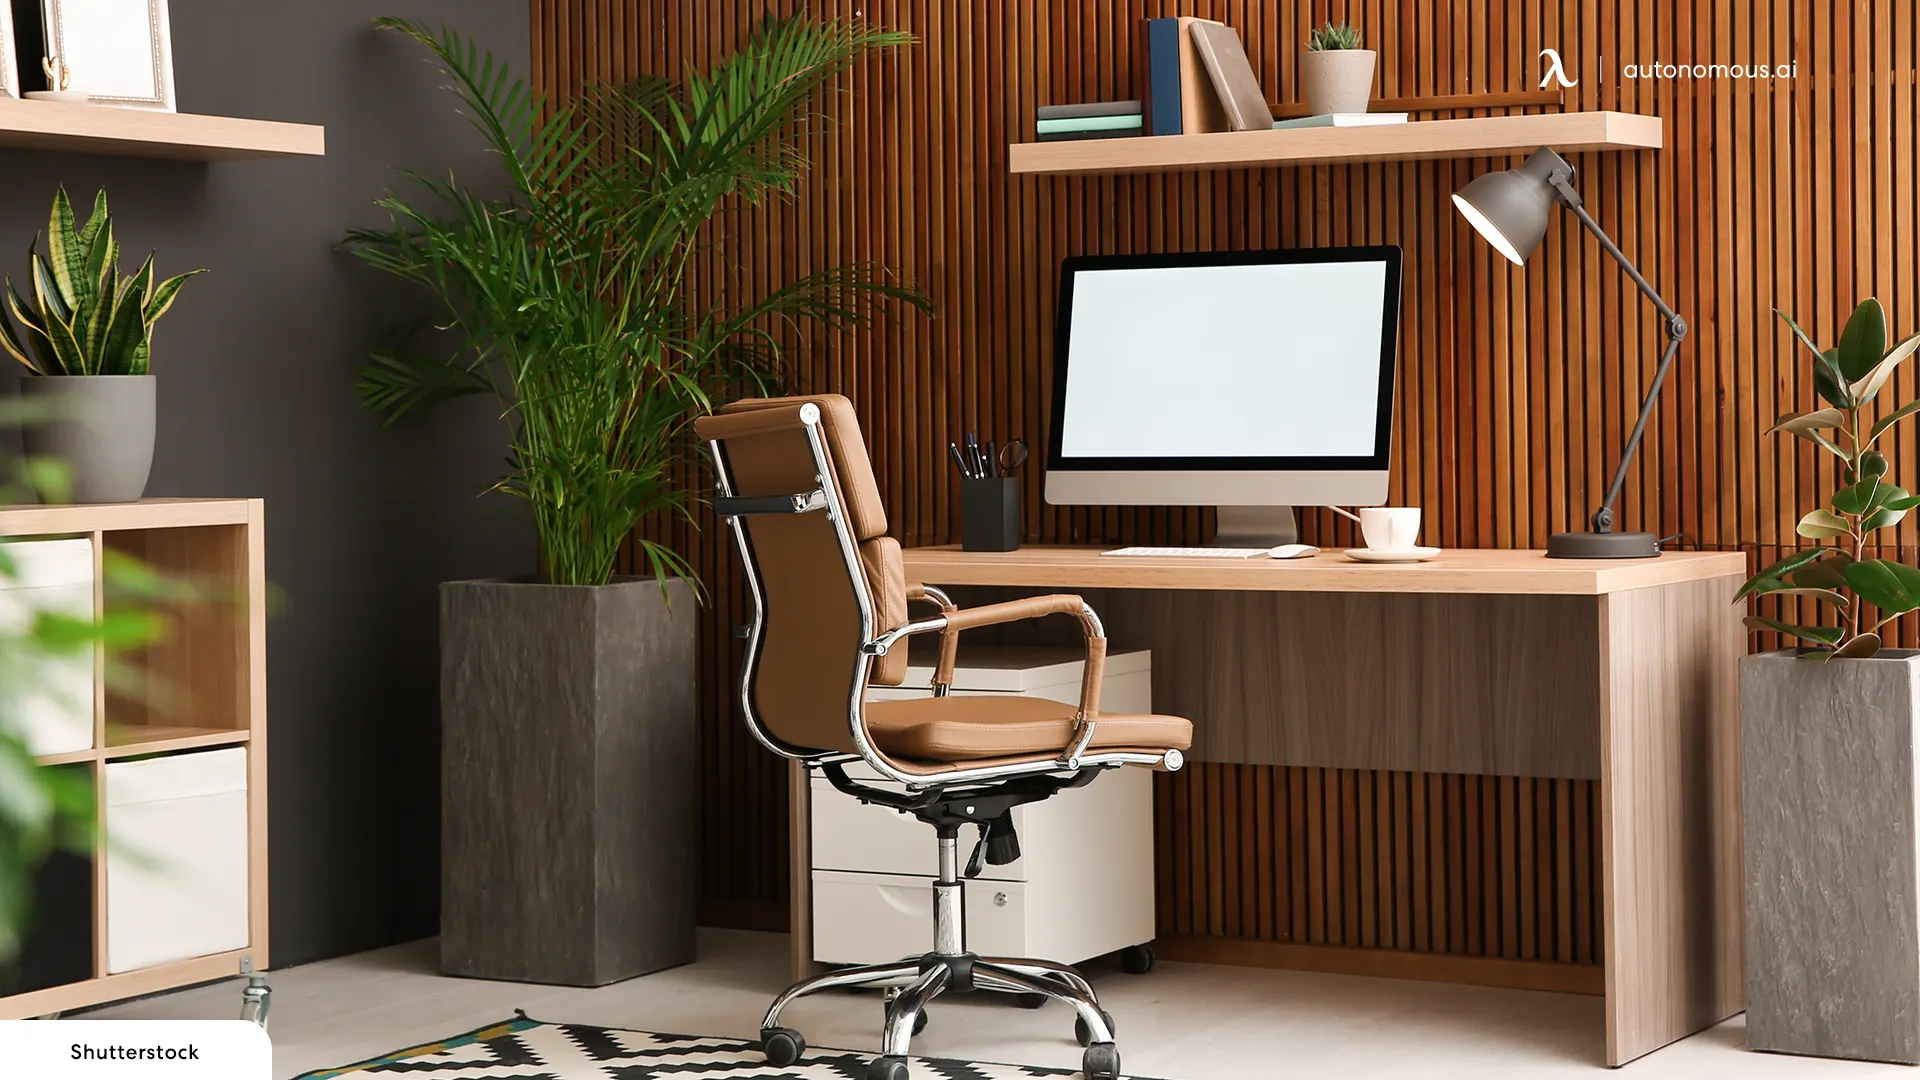 Hard Upholstered Chairs - upholstered office chair